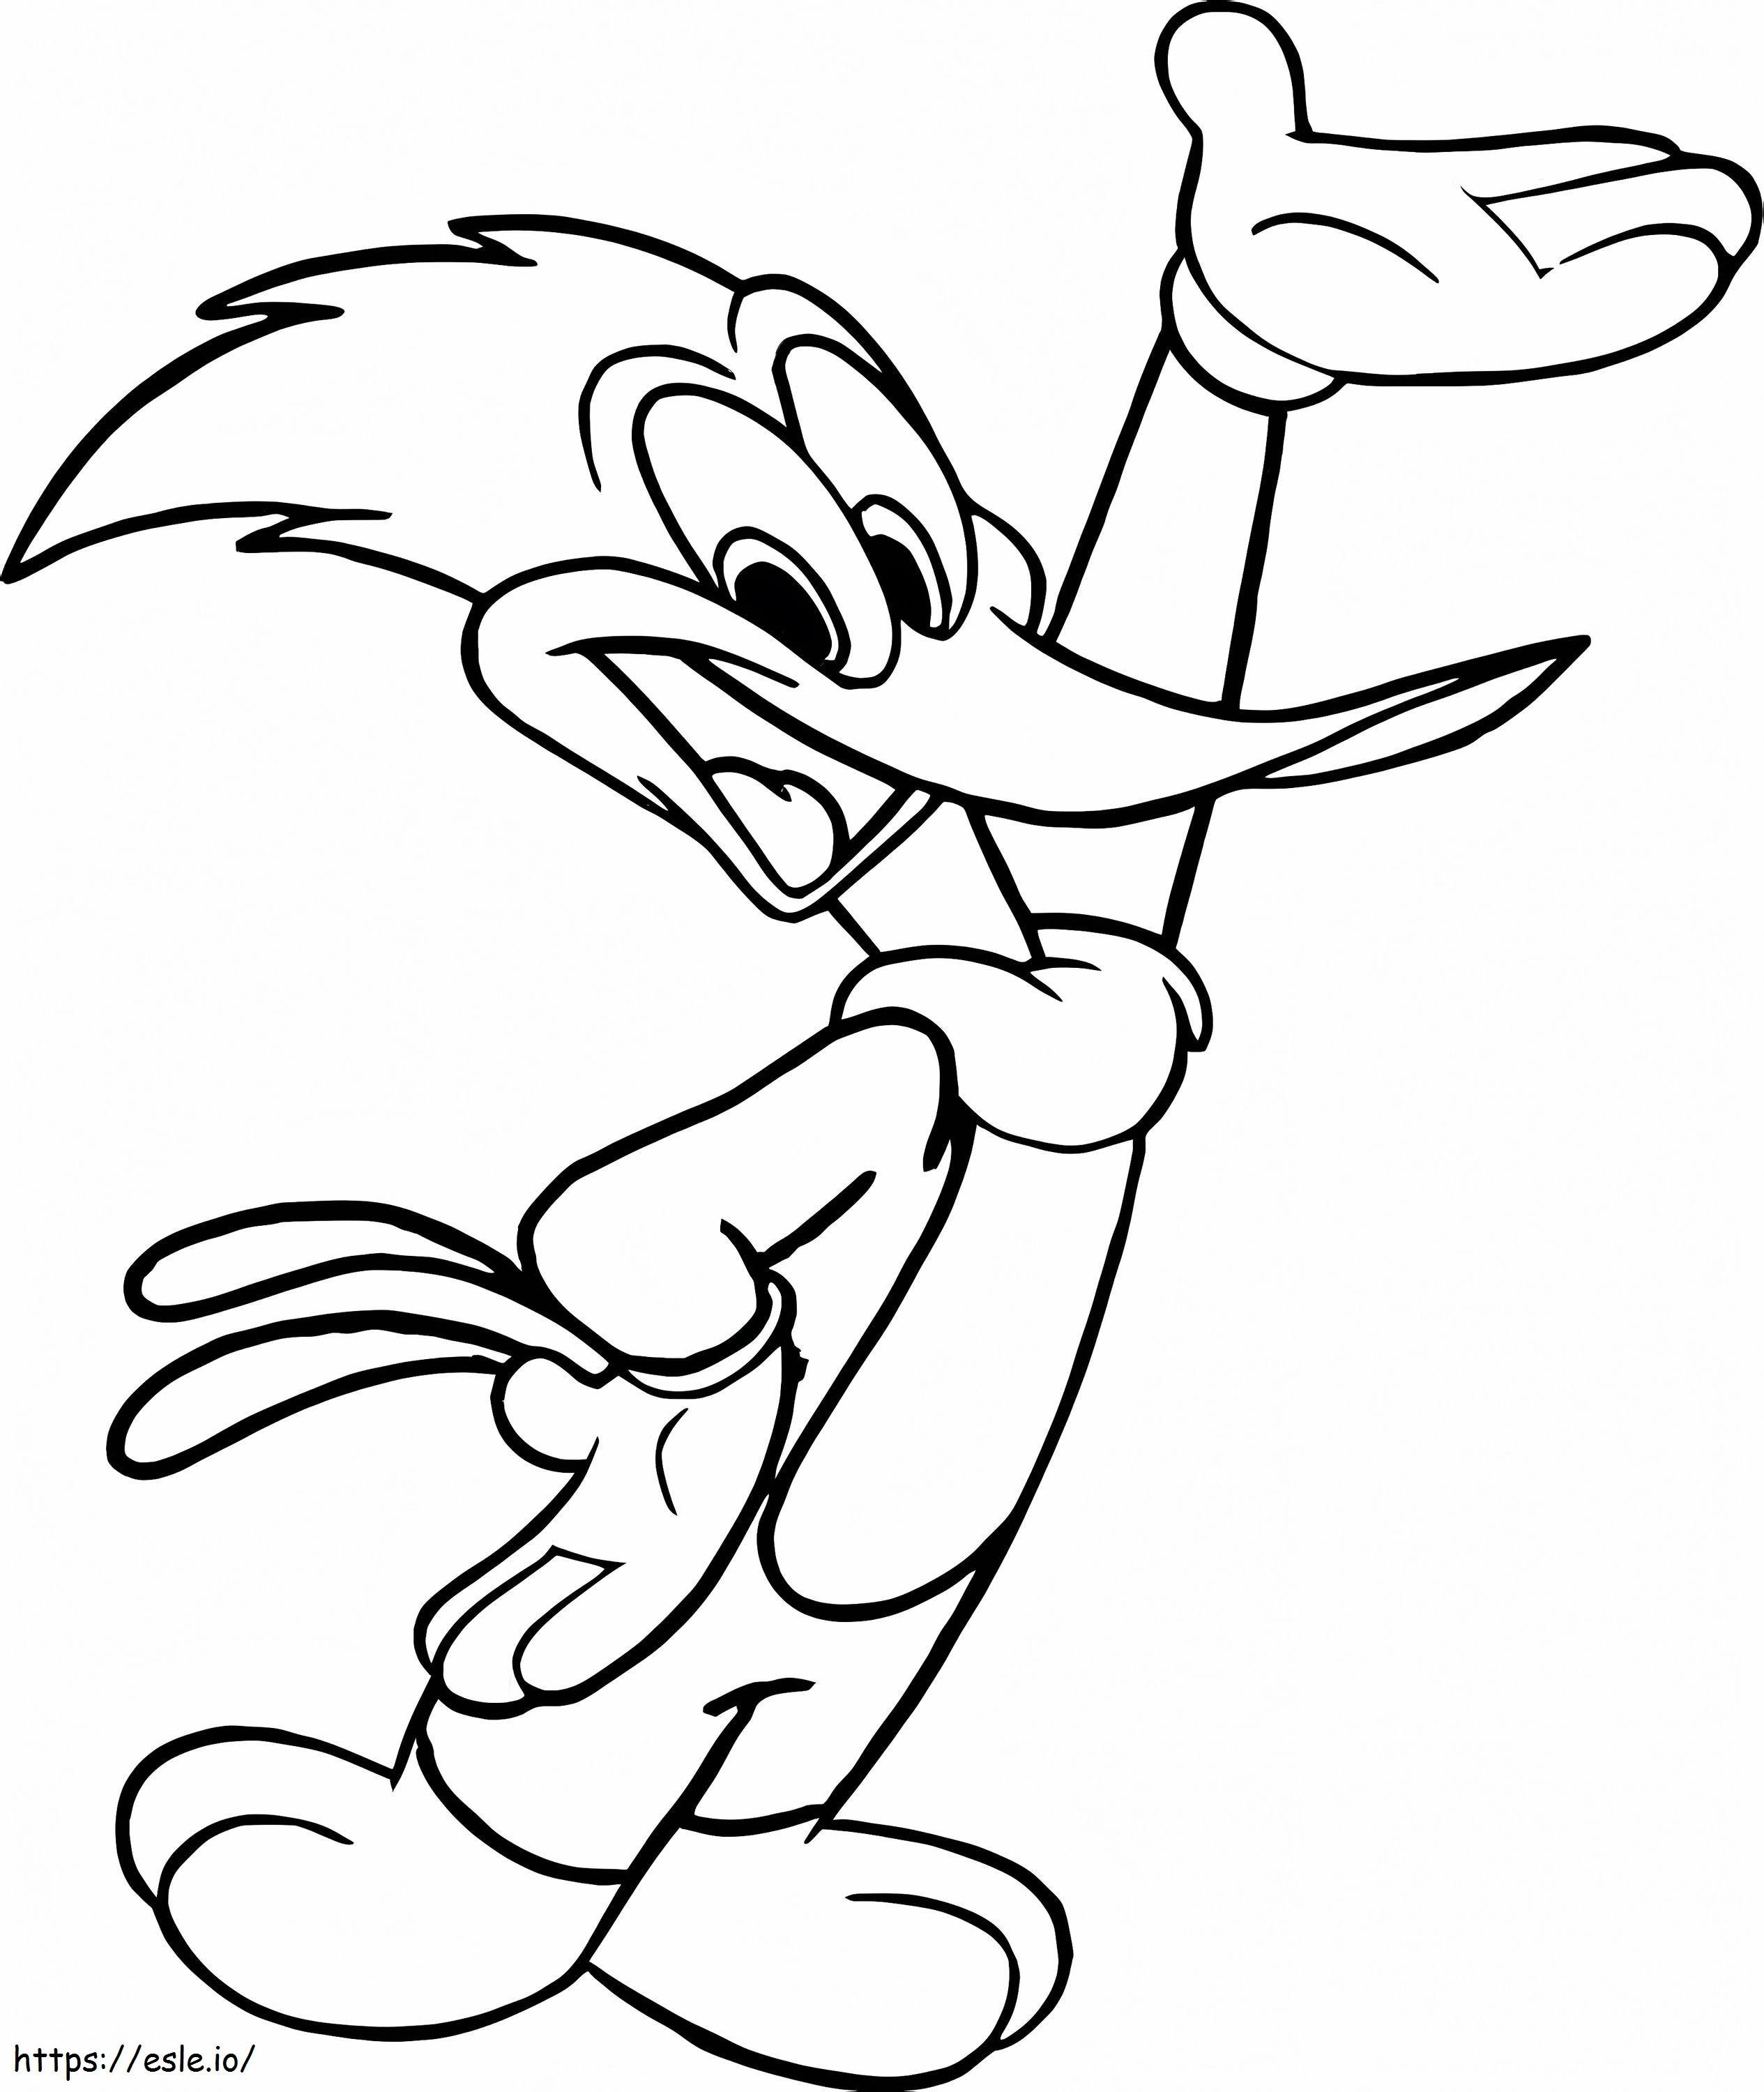 Normal Woody Woodpecker coloring page